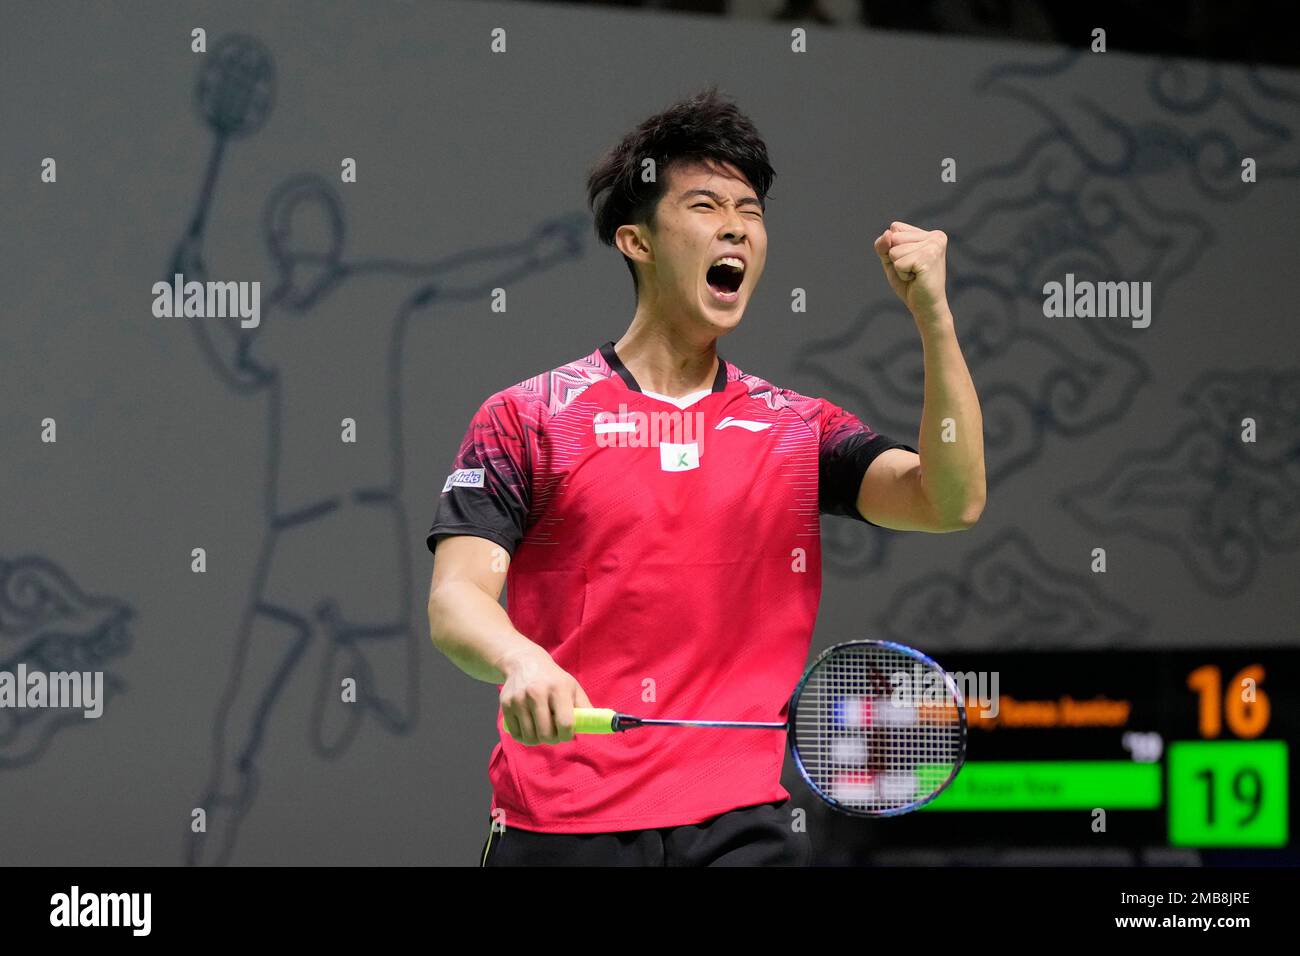 Singapores Loh Kean Yew reacts after scoring a point against France Toma Junior Popov during their mens singles second round match at Indonesia Open badminton tournament at Istora Gelora Bung Karno Stadium